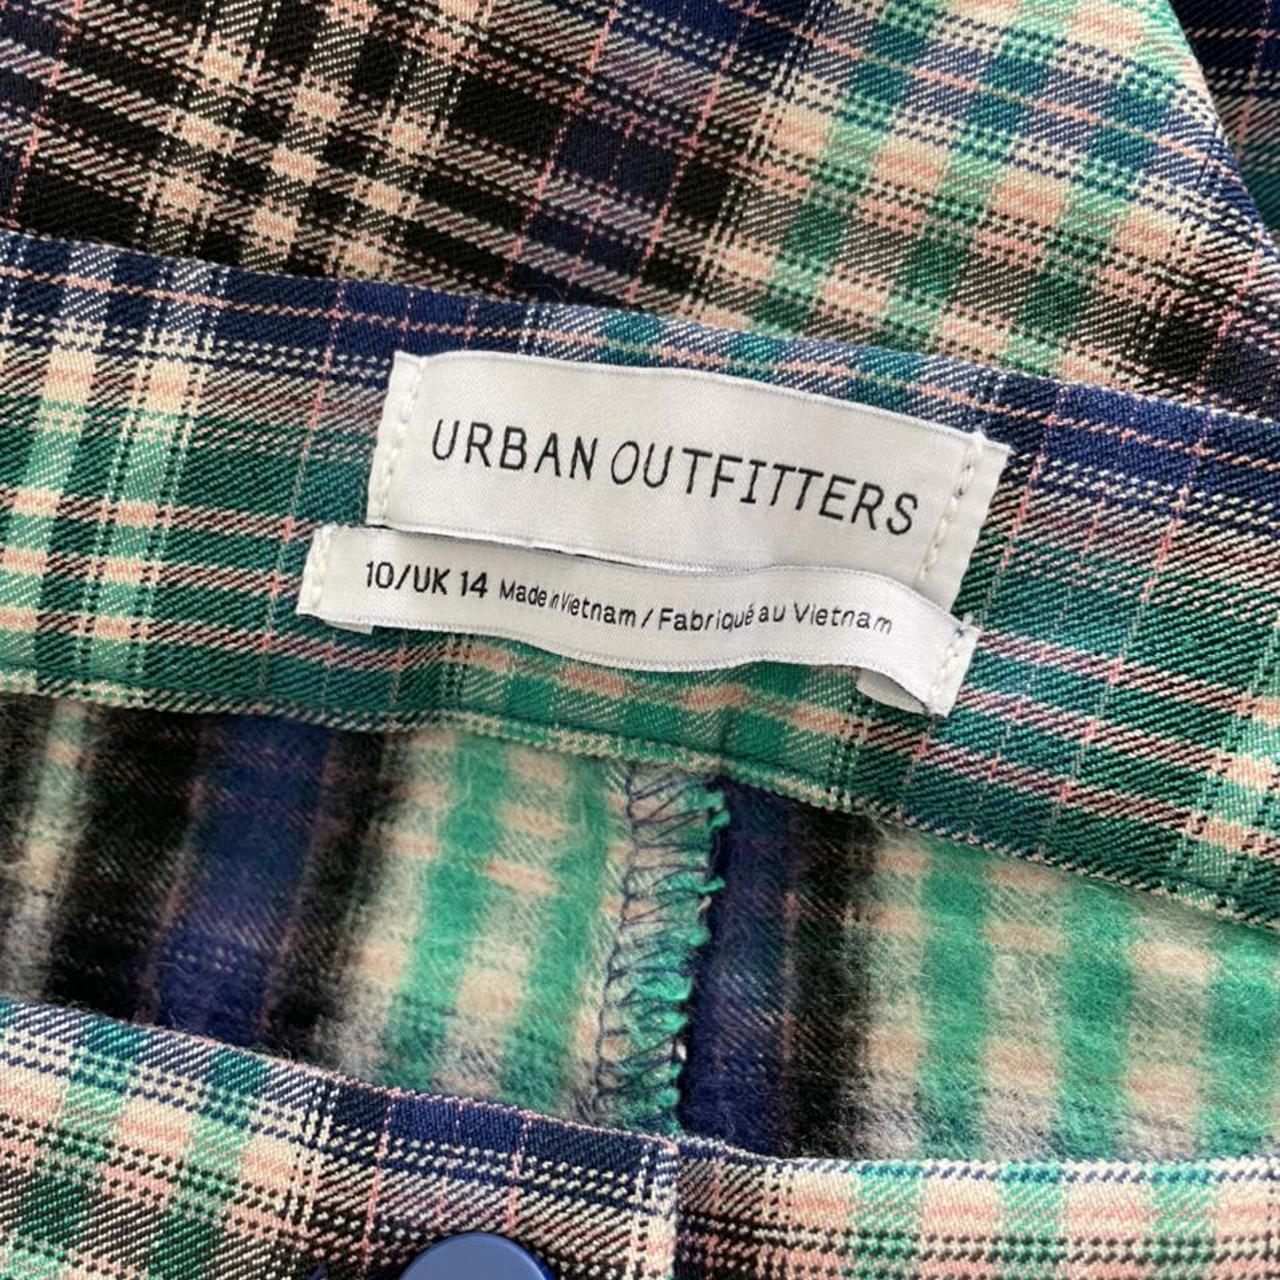 🛴 Urban Outfitters Plaid Stretch Pants • Good... - Depop